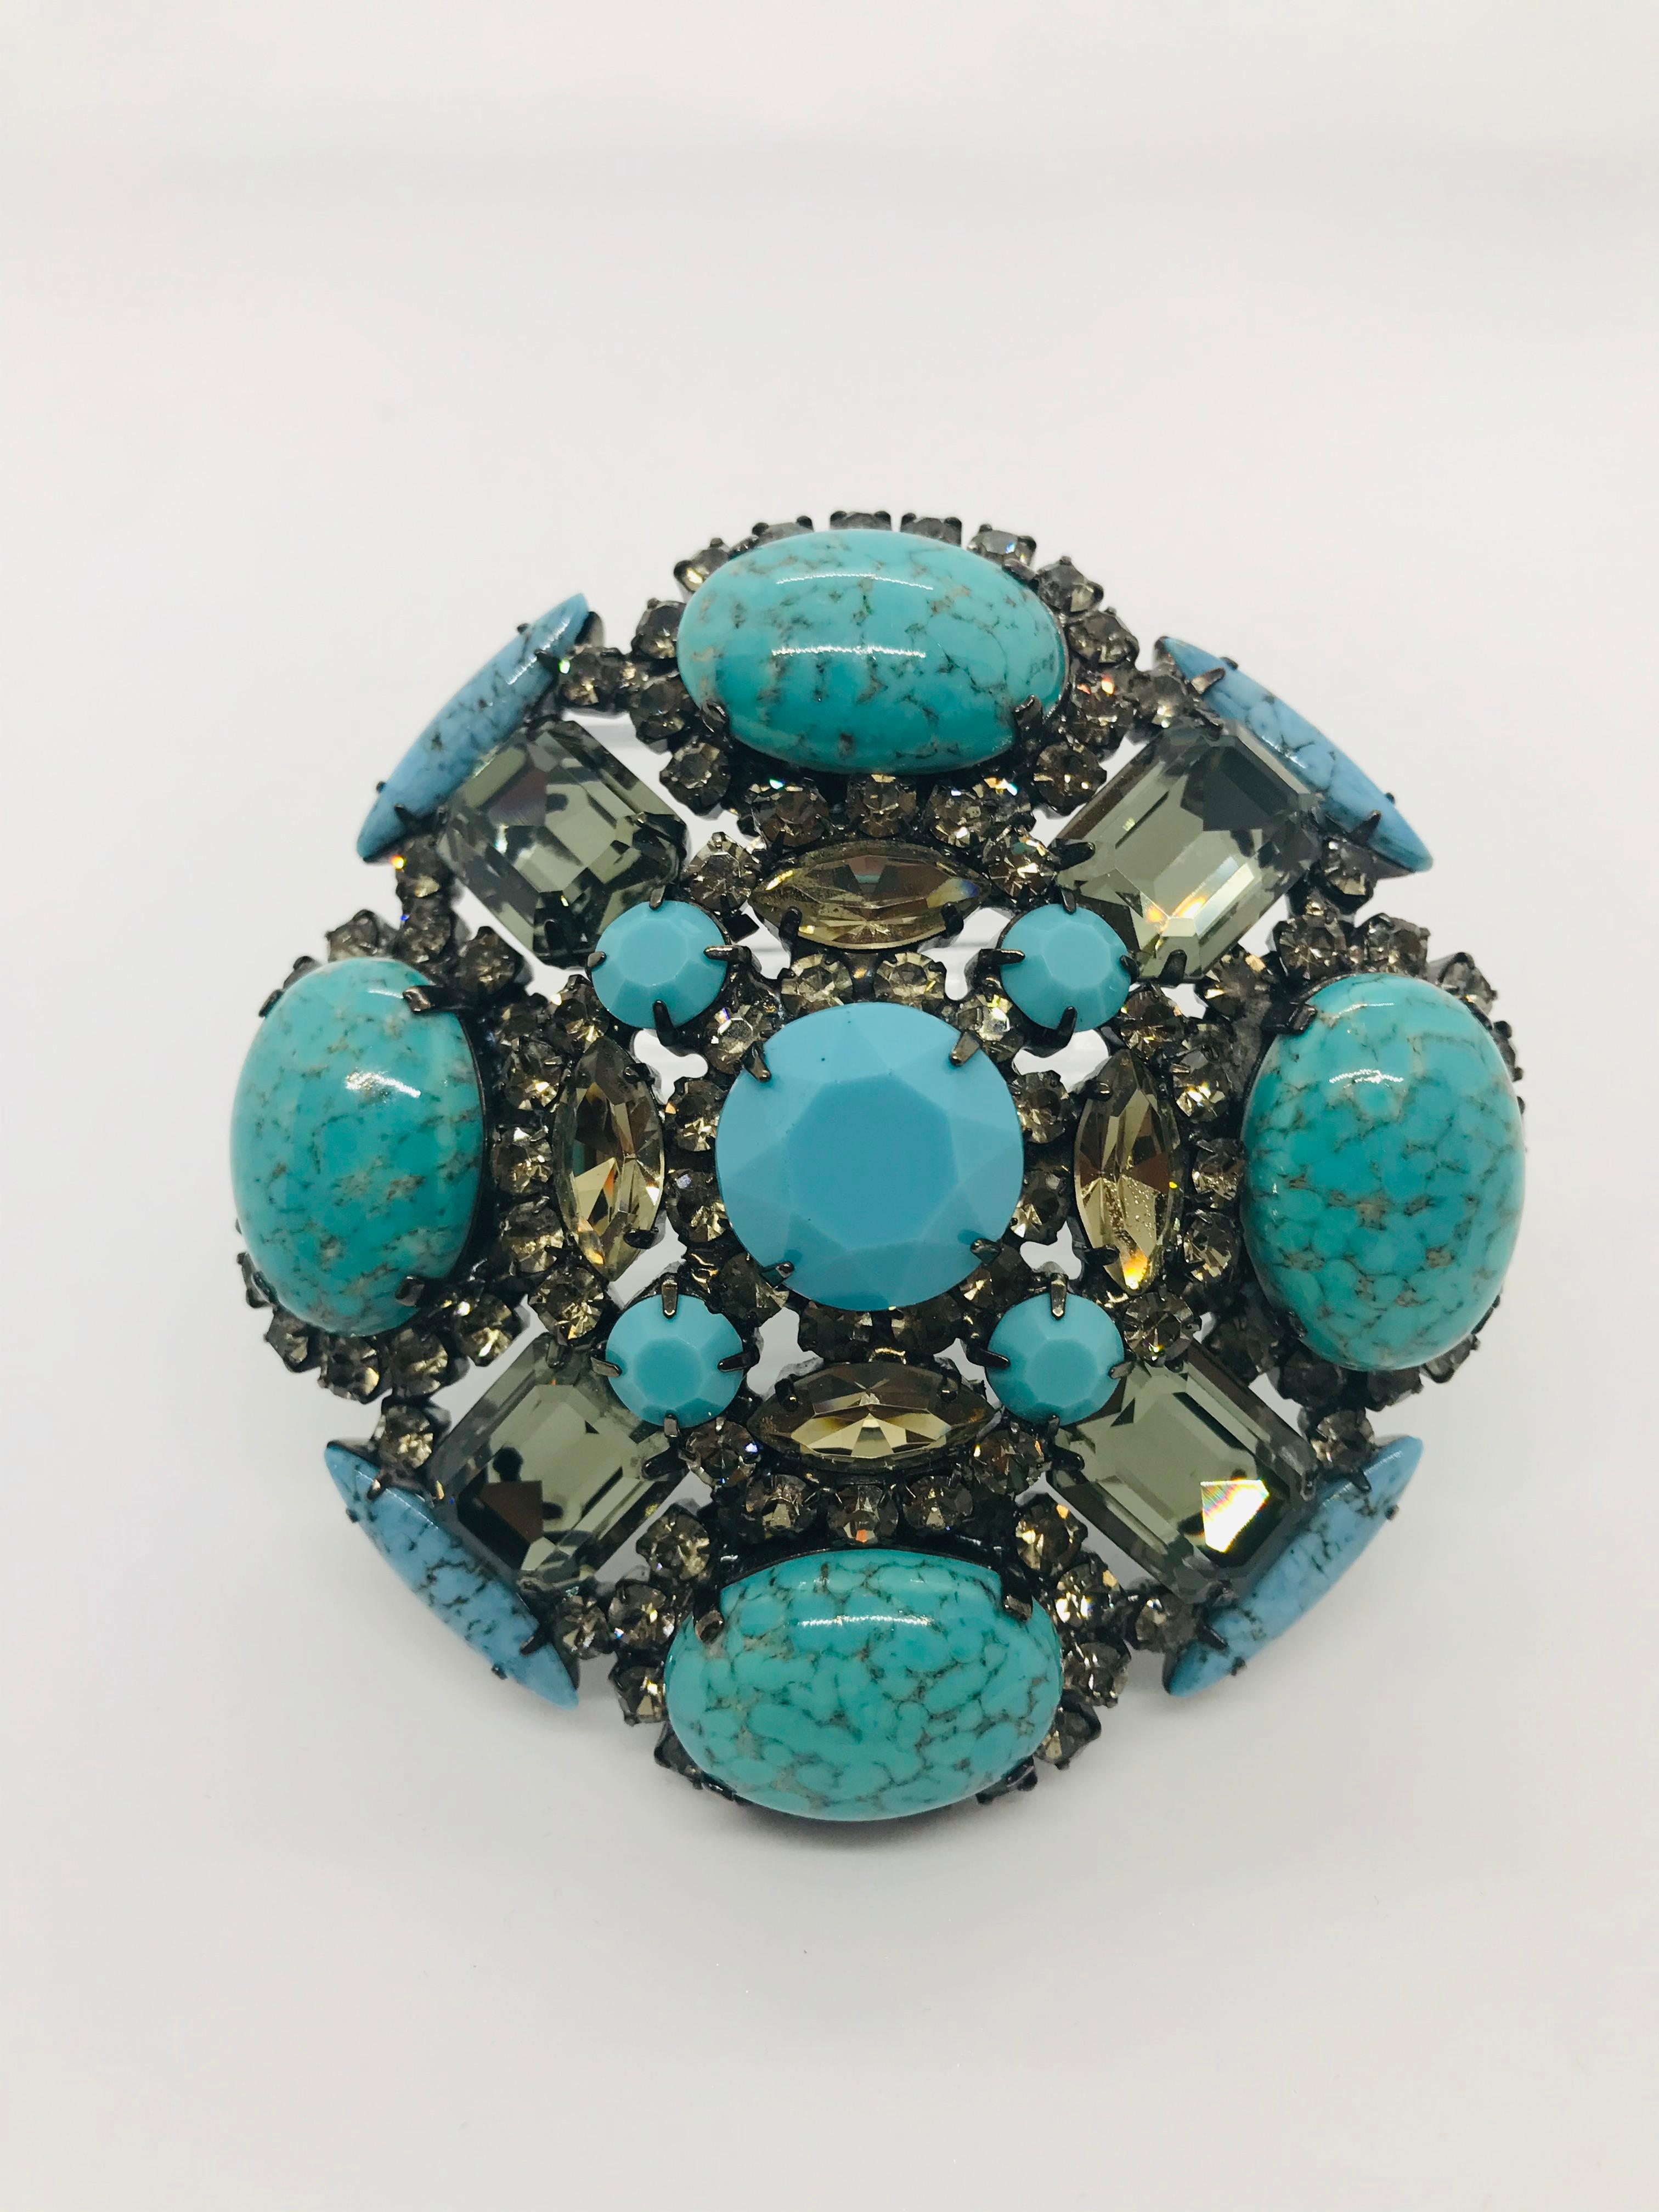 This bold domed, turquoise matrix and black diamond Austrian crystal Maltese cross brooch features a rare, large, round 1960s vintage Swarovski turquoise stone and four Czech turquoise matrix oval cabochon stones.  A great brooch to wear on the